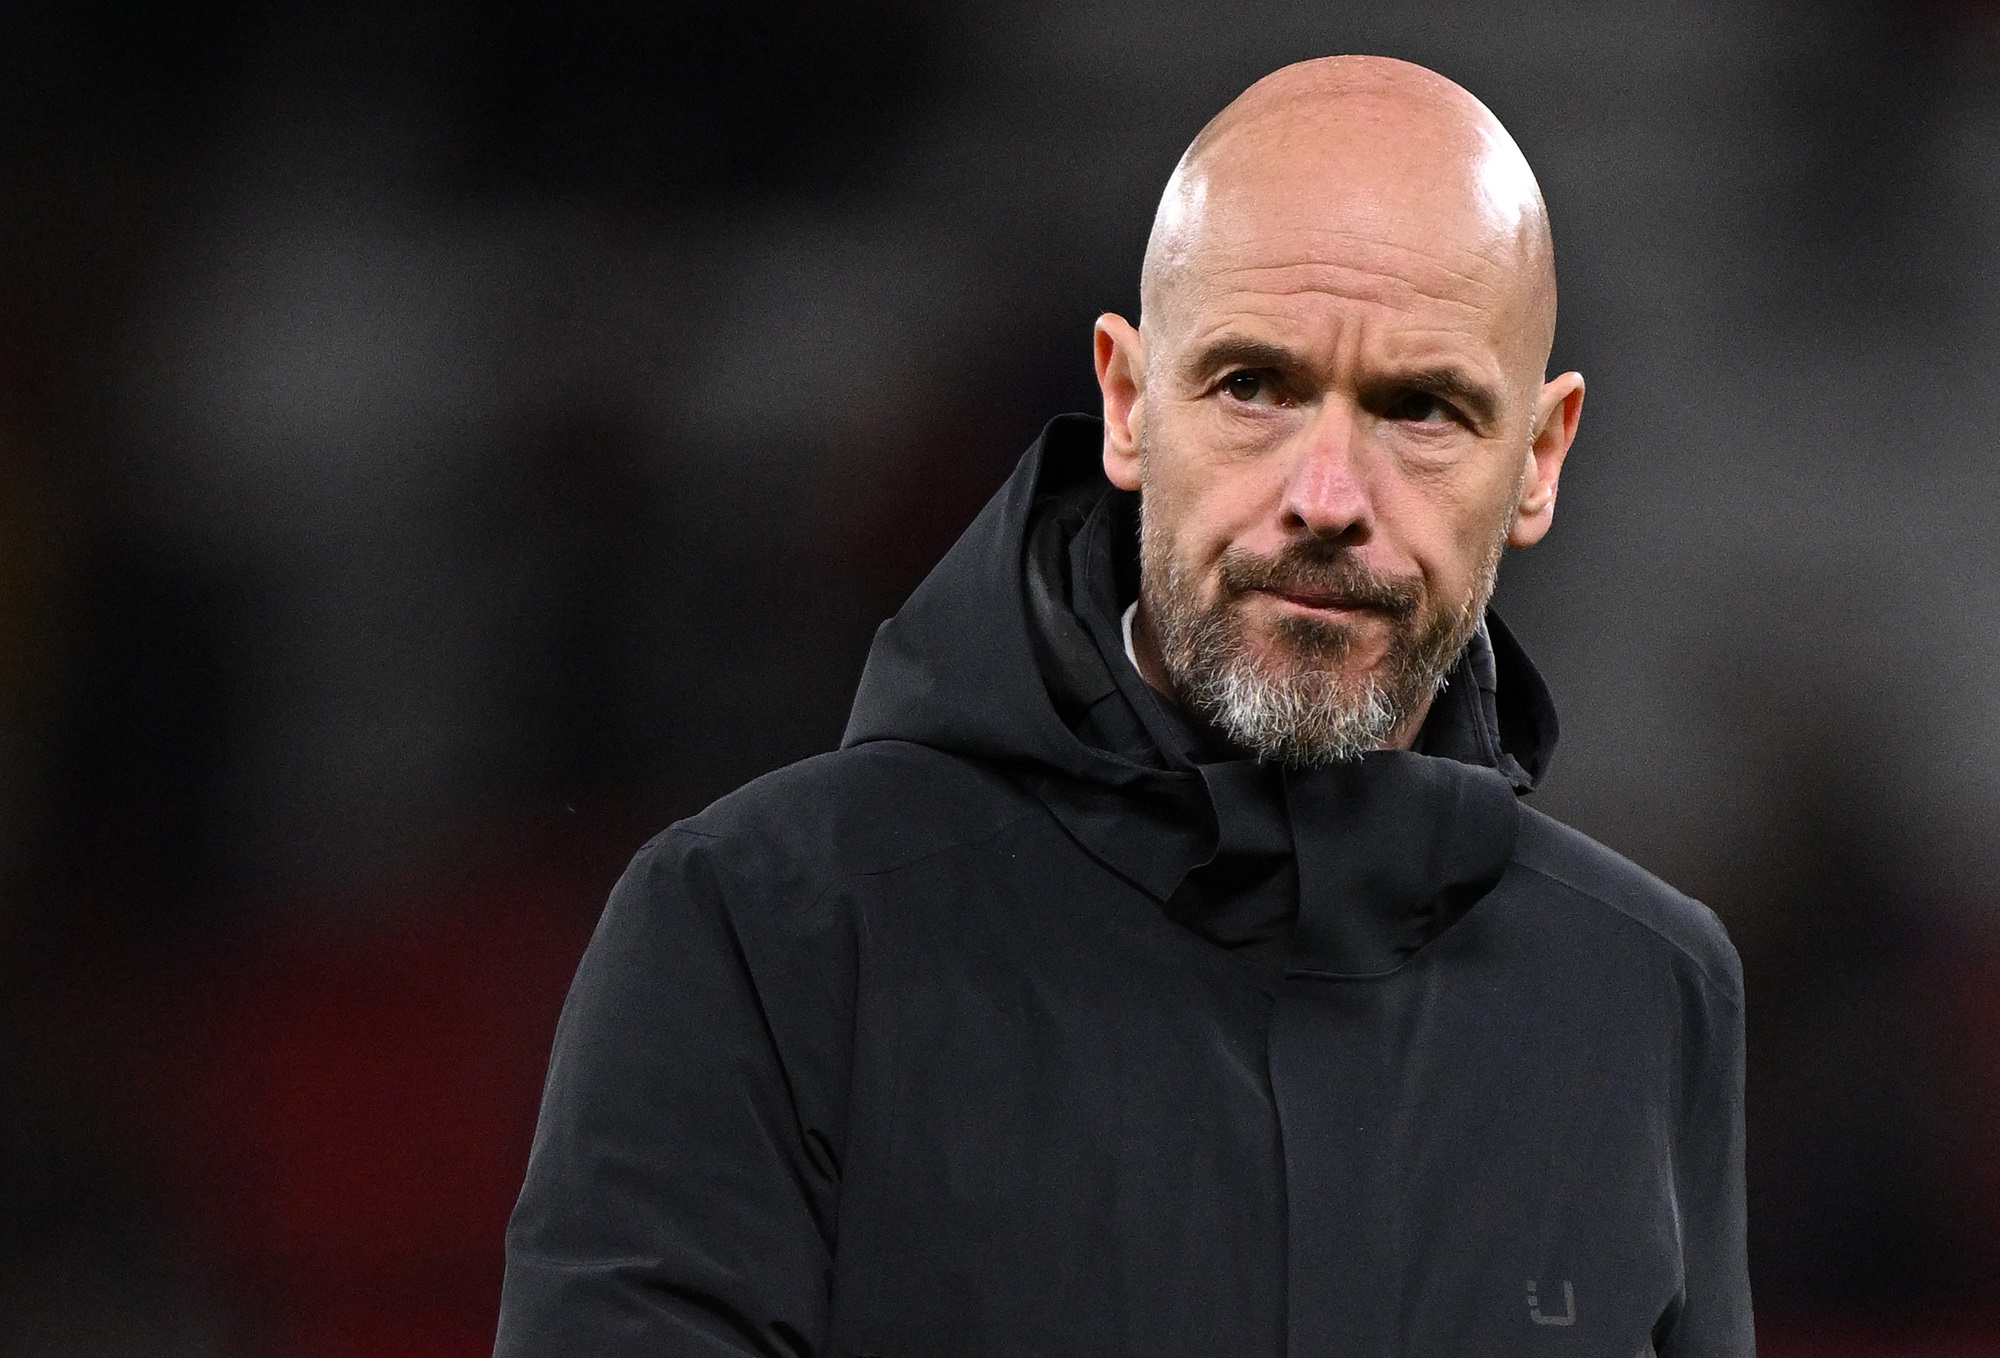 Exclusive: Ten Hag situation is one to watch says Romano